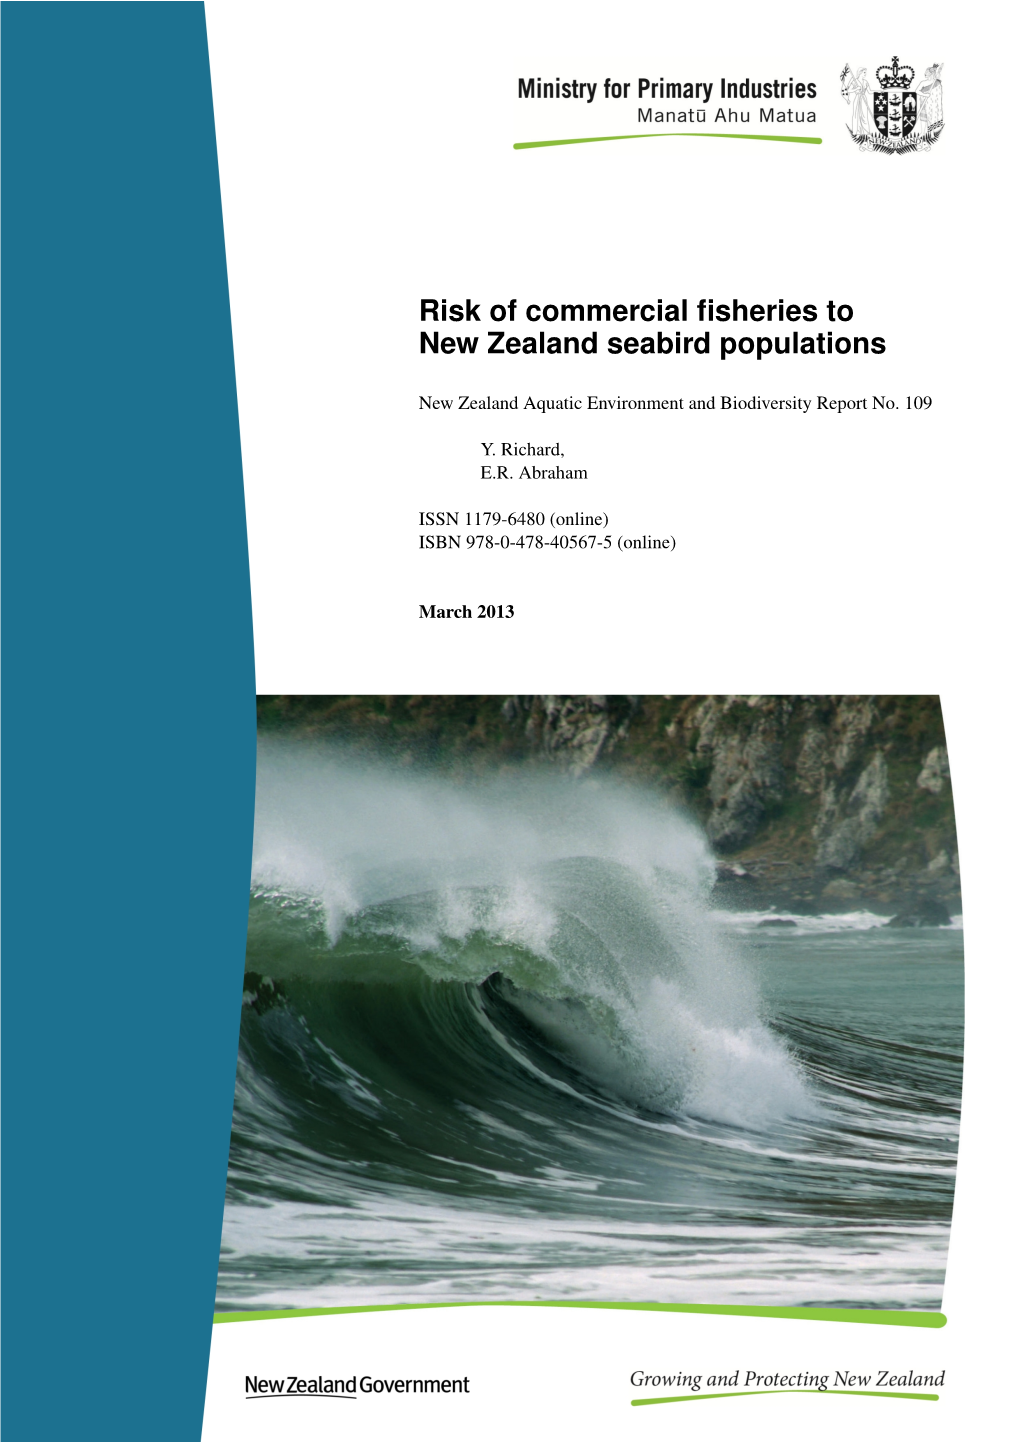 Risk of Commercial Fisheries to New Zealand Seabird Populations